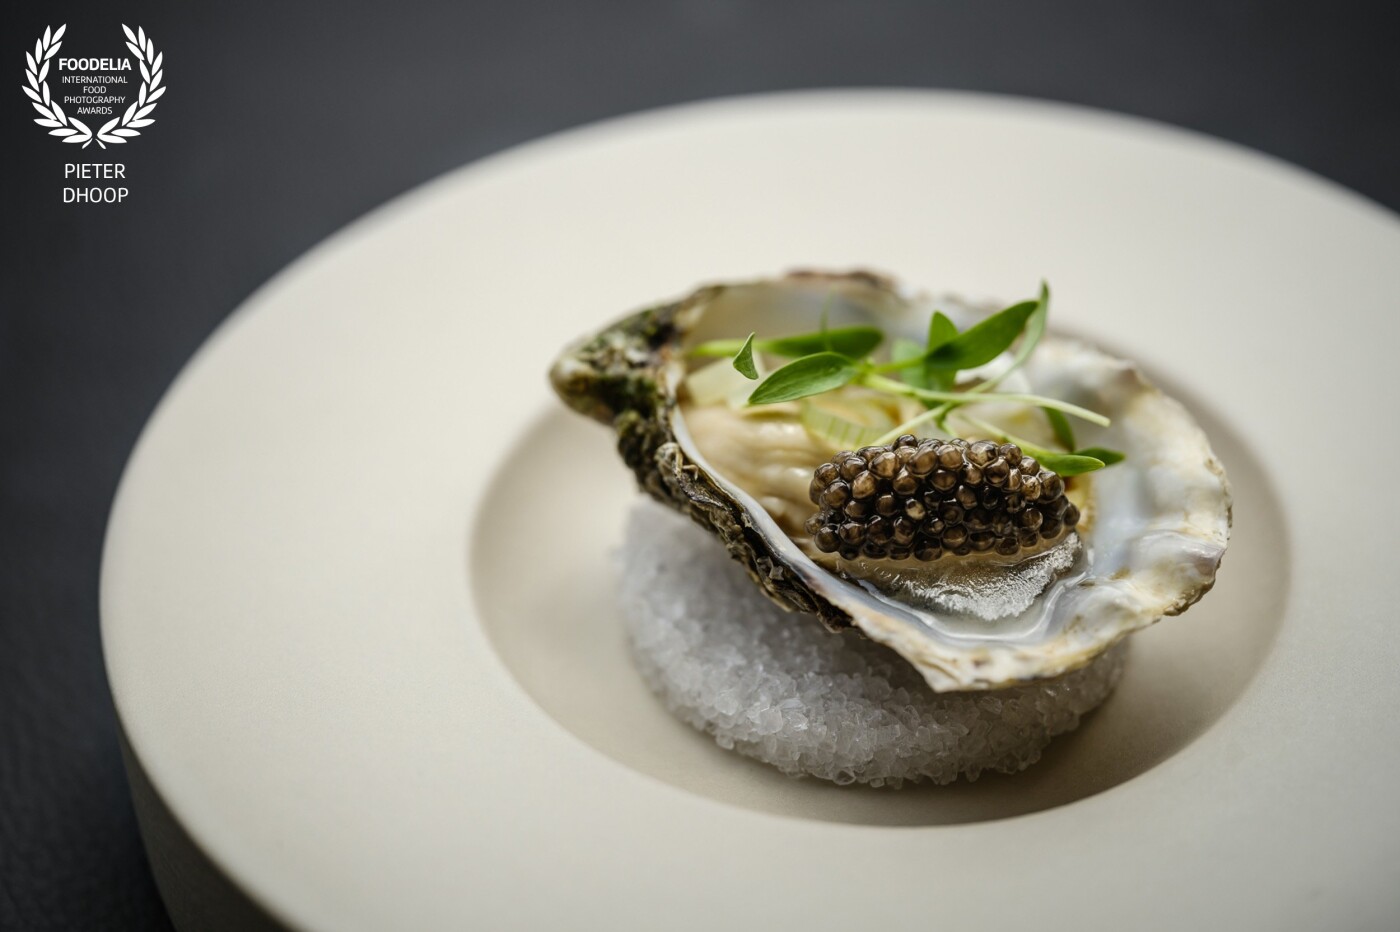 Oyster shot for restaurant Alma In Oisterwijk in The Netherlands. I used daylight the fujifilm GFX100 and the GF120mm F4 lens. Iso 400 /120mm/F4/1/1000sec/handheld.